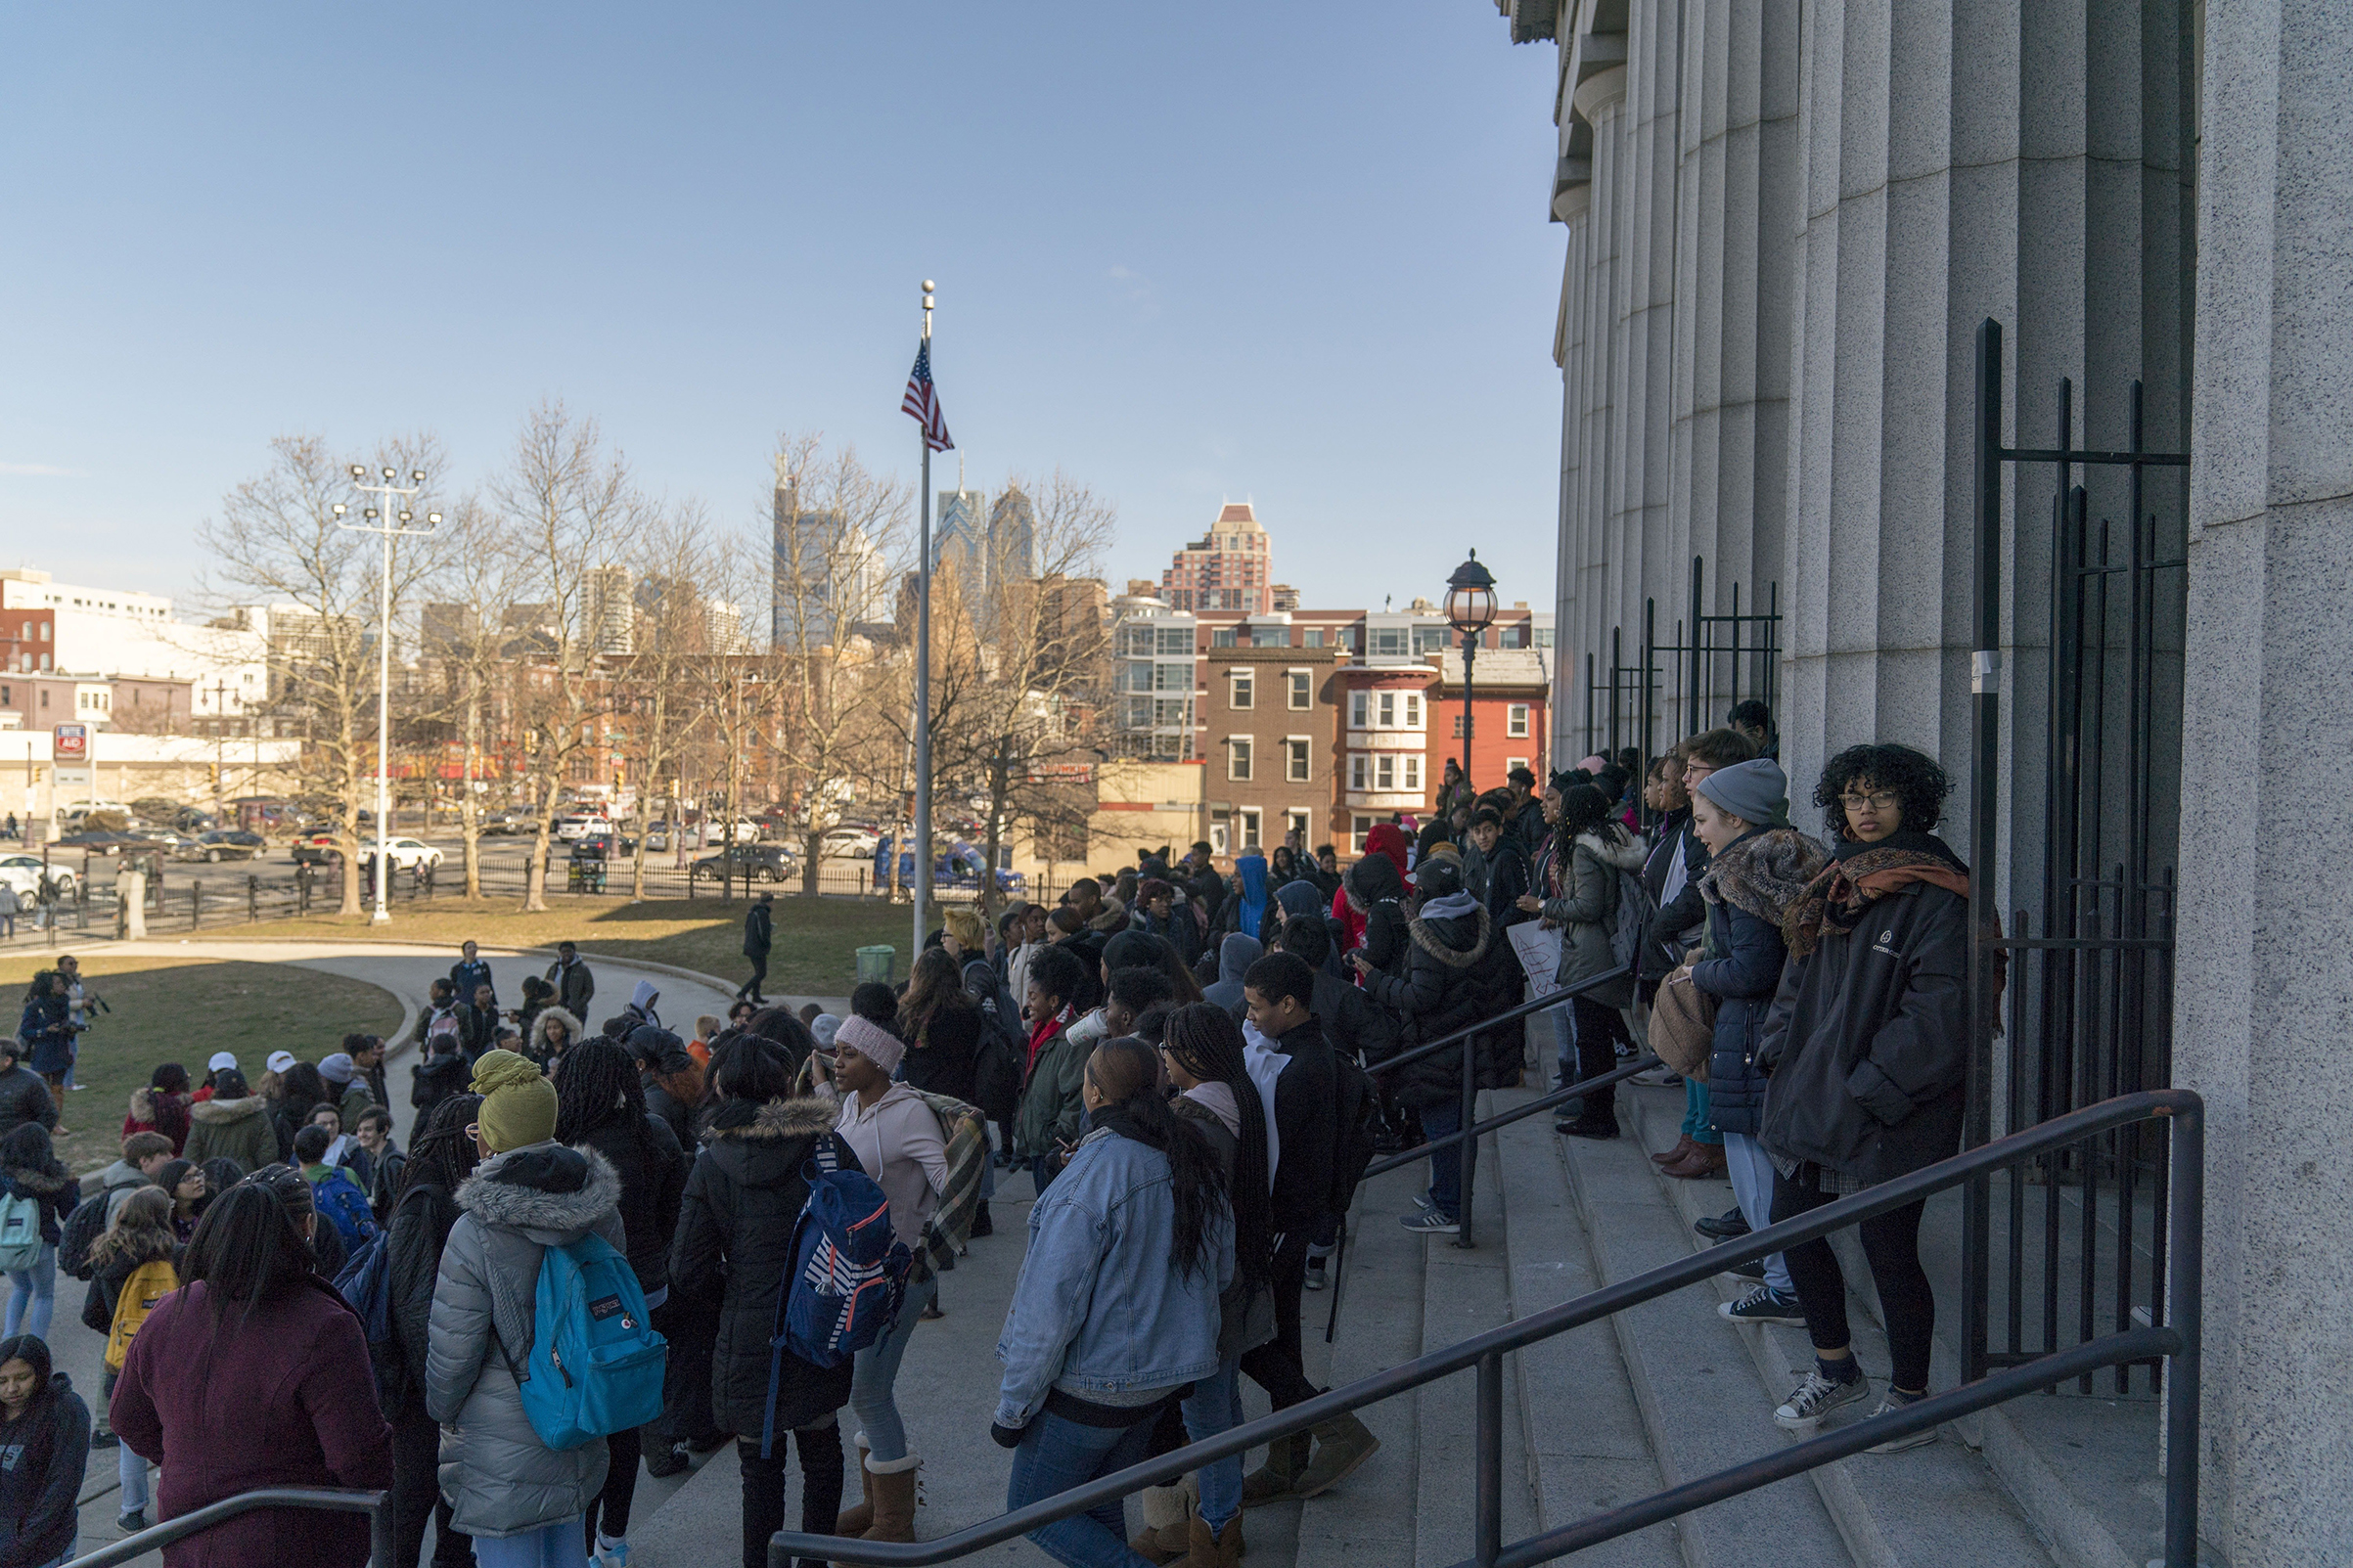 Students at Philadelphia High School of Creative And Performing Arts participate in a walkout to address school safety and gun violence in Philadelphia, on March 14, 2018. (Jessica Kourkounis—Getty Images)